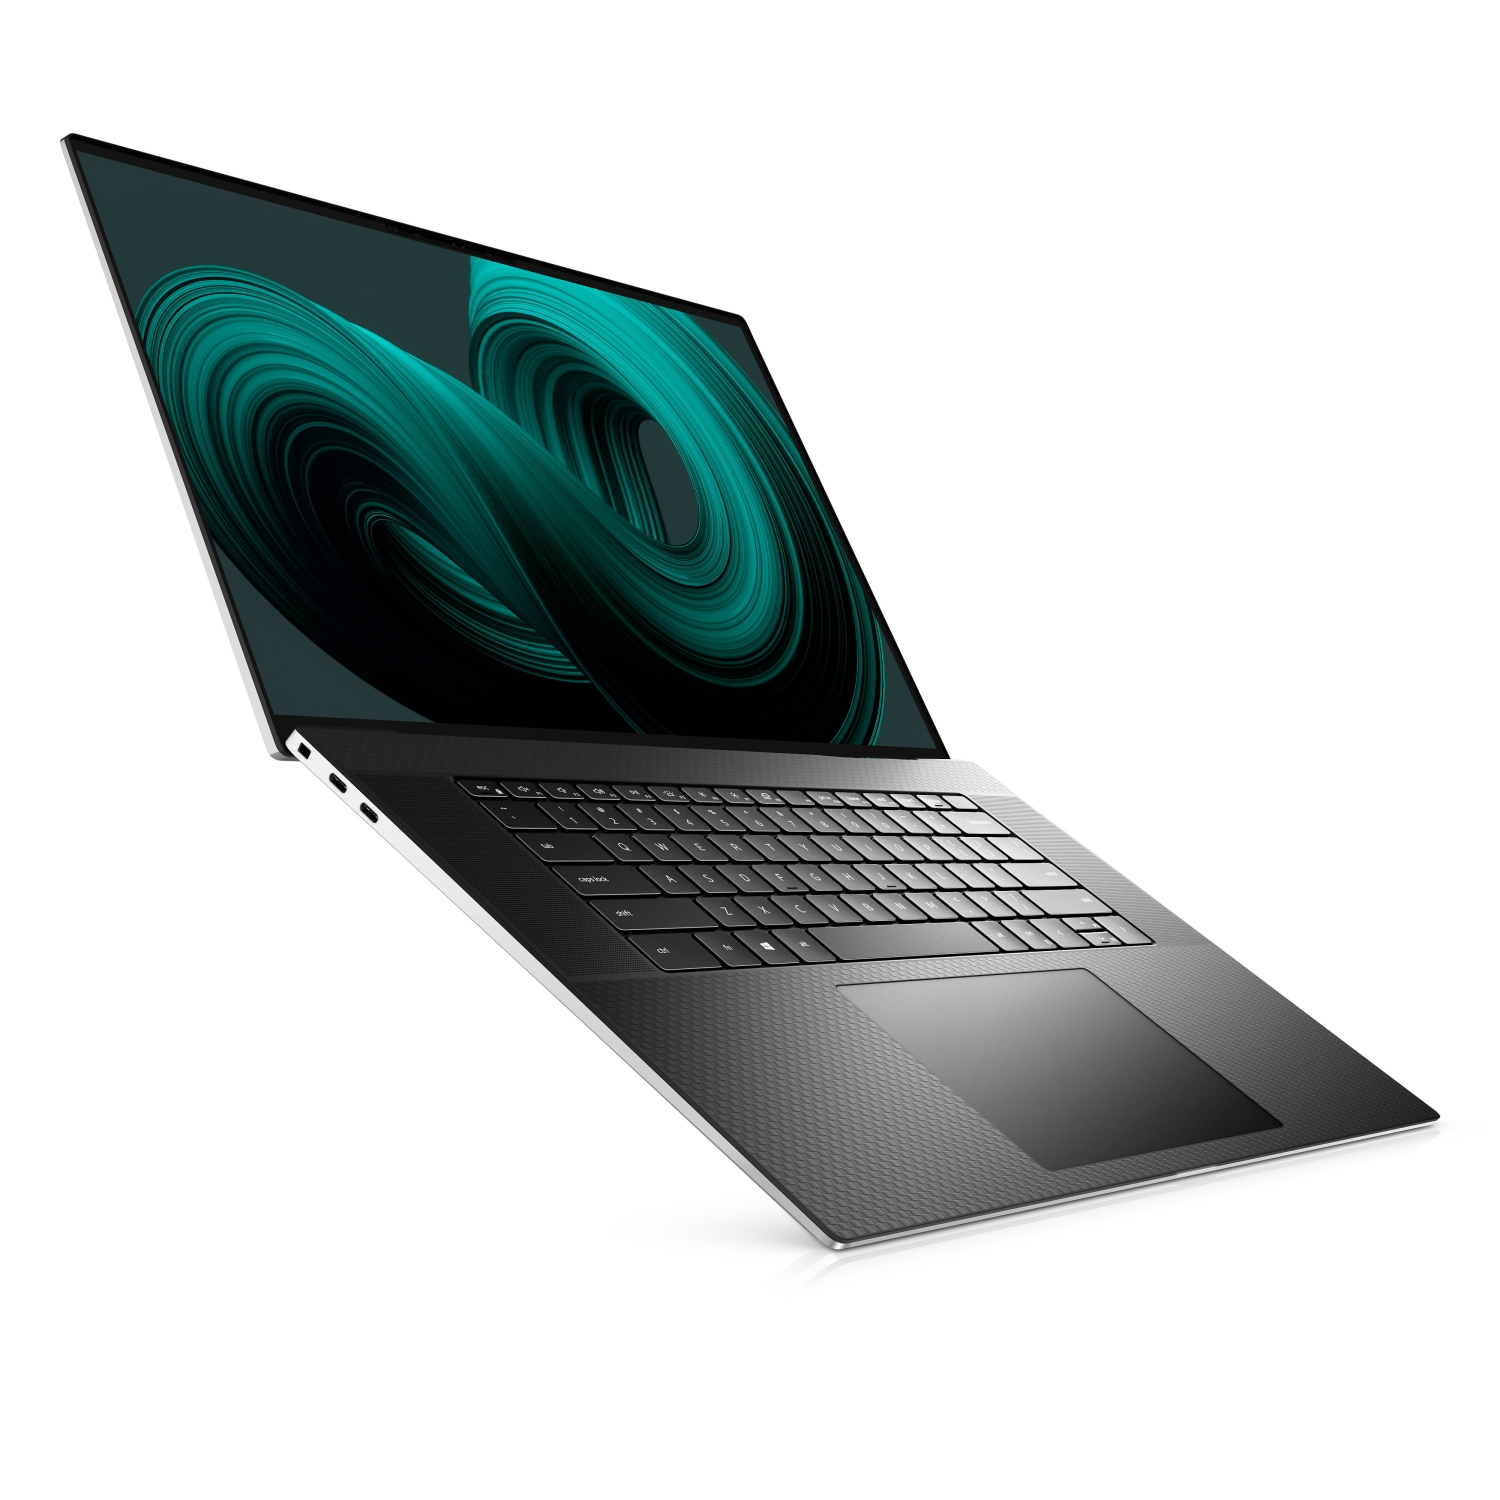 Refurbished (Excellent) – Dell XPS 9710 Laptop (2021) | 17" FHD+ | Core i7 - 512GB SSD - 32GB RAM - RTX 3060 | 8 Cores @ 4.6 GHz - 11th Gen CPU - 6GB GDDR6